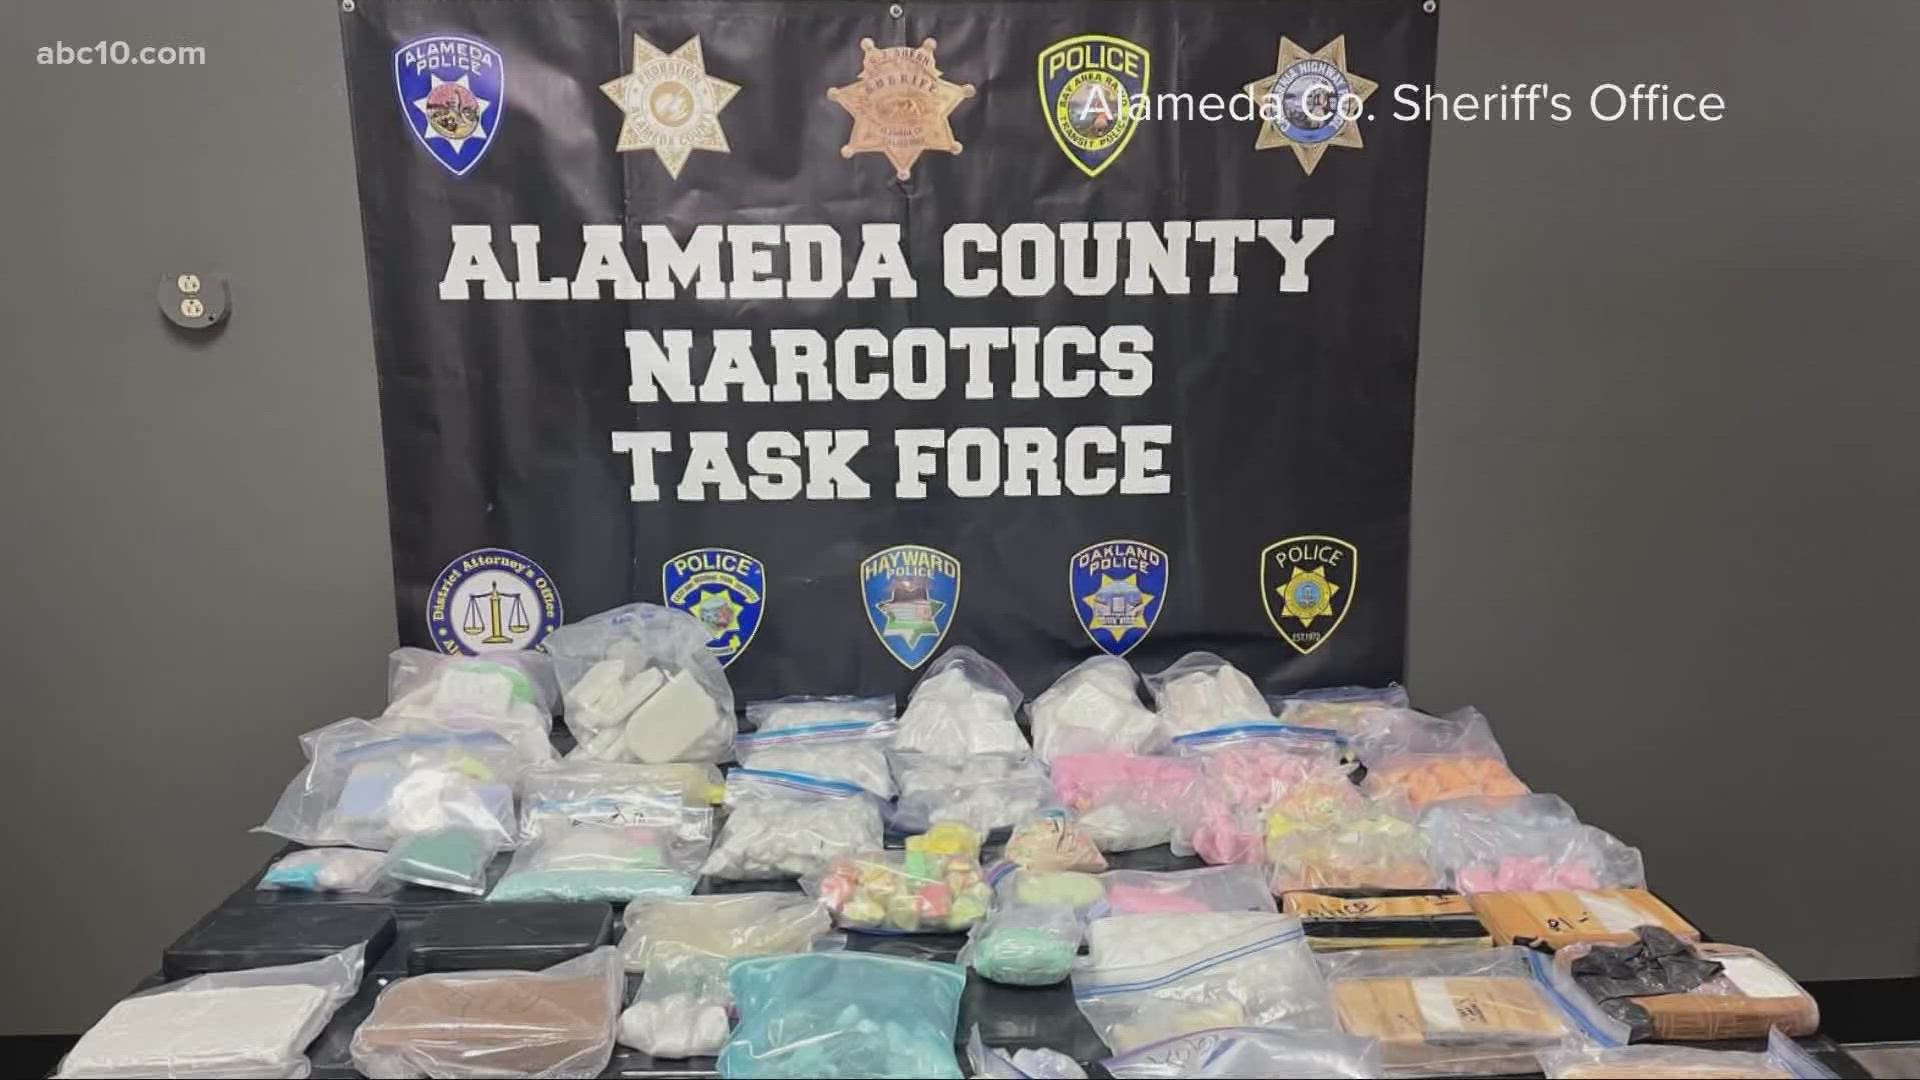 Authorities near San Francisco say they seized nearly 100 pounds of illicit fentanyl worth over $4 million.